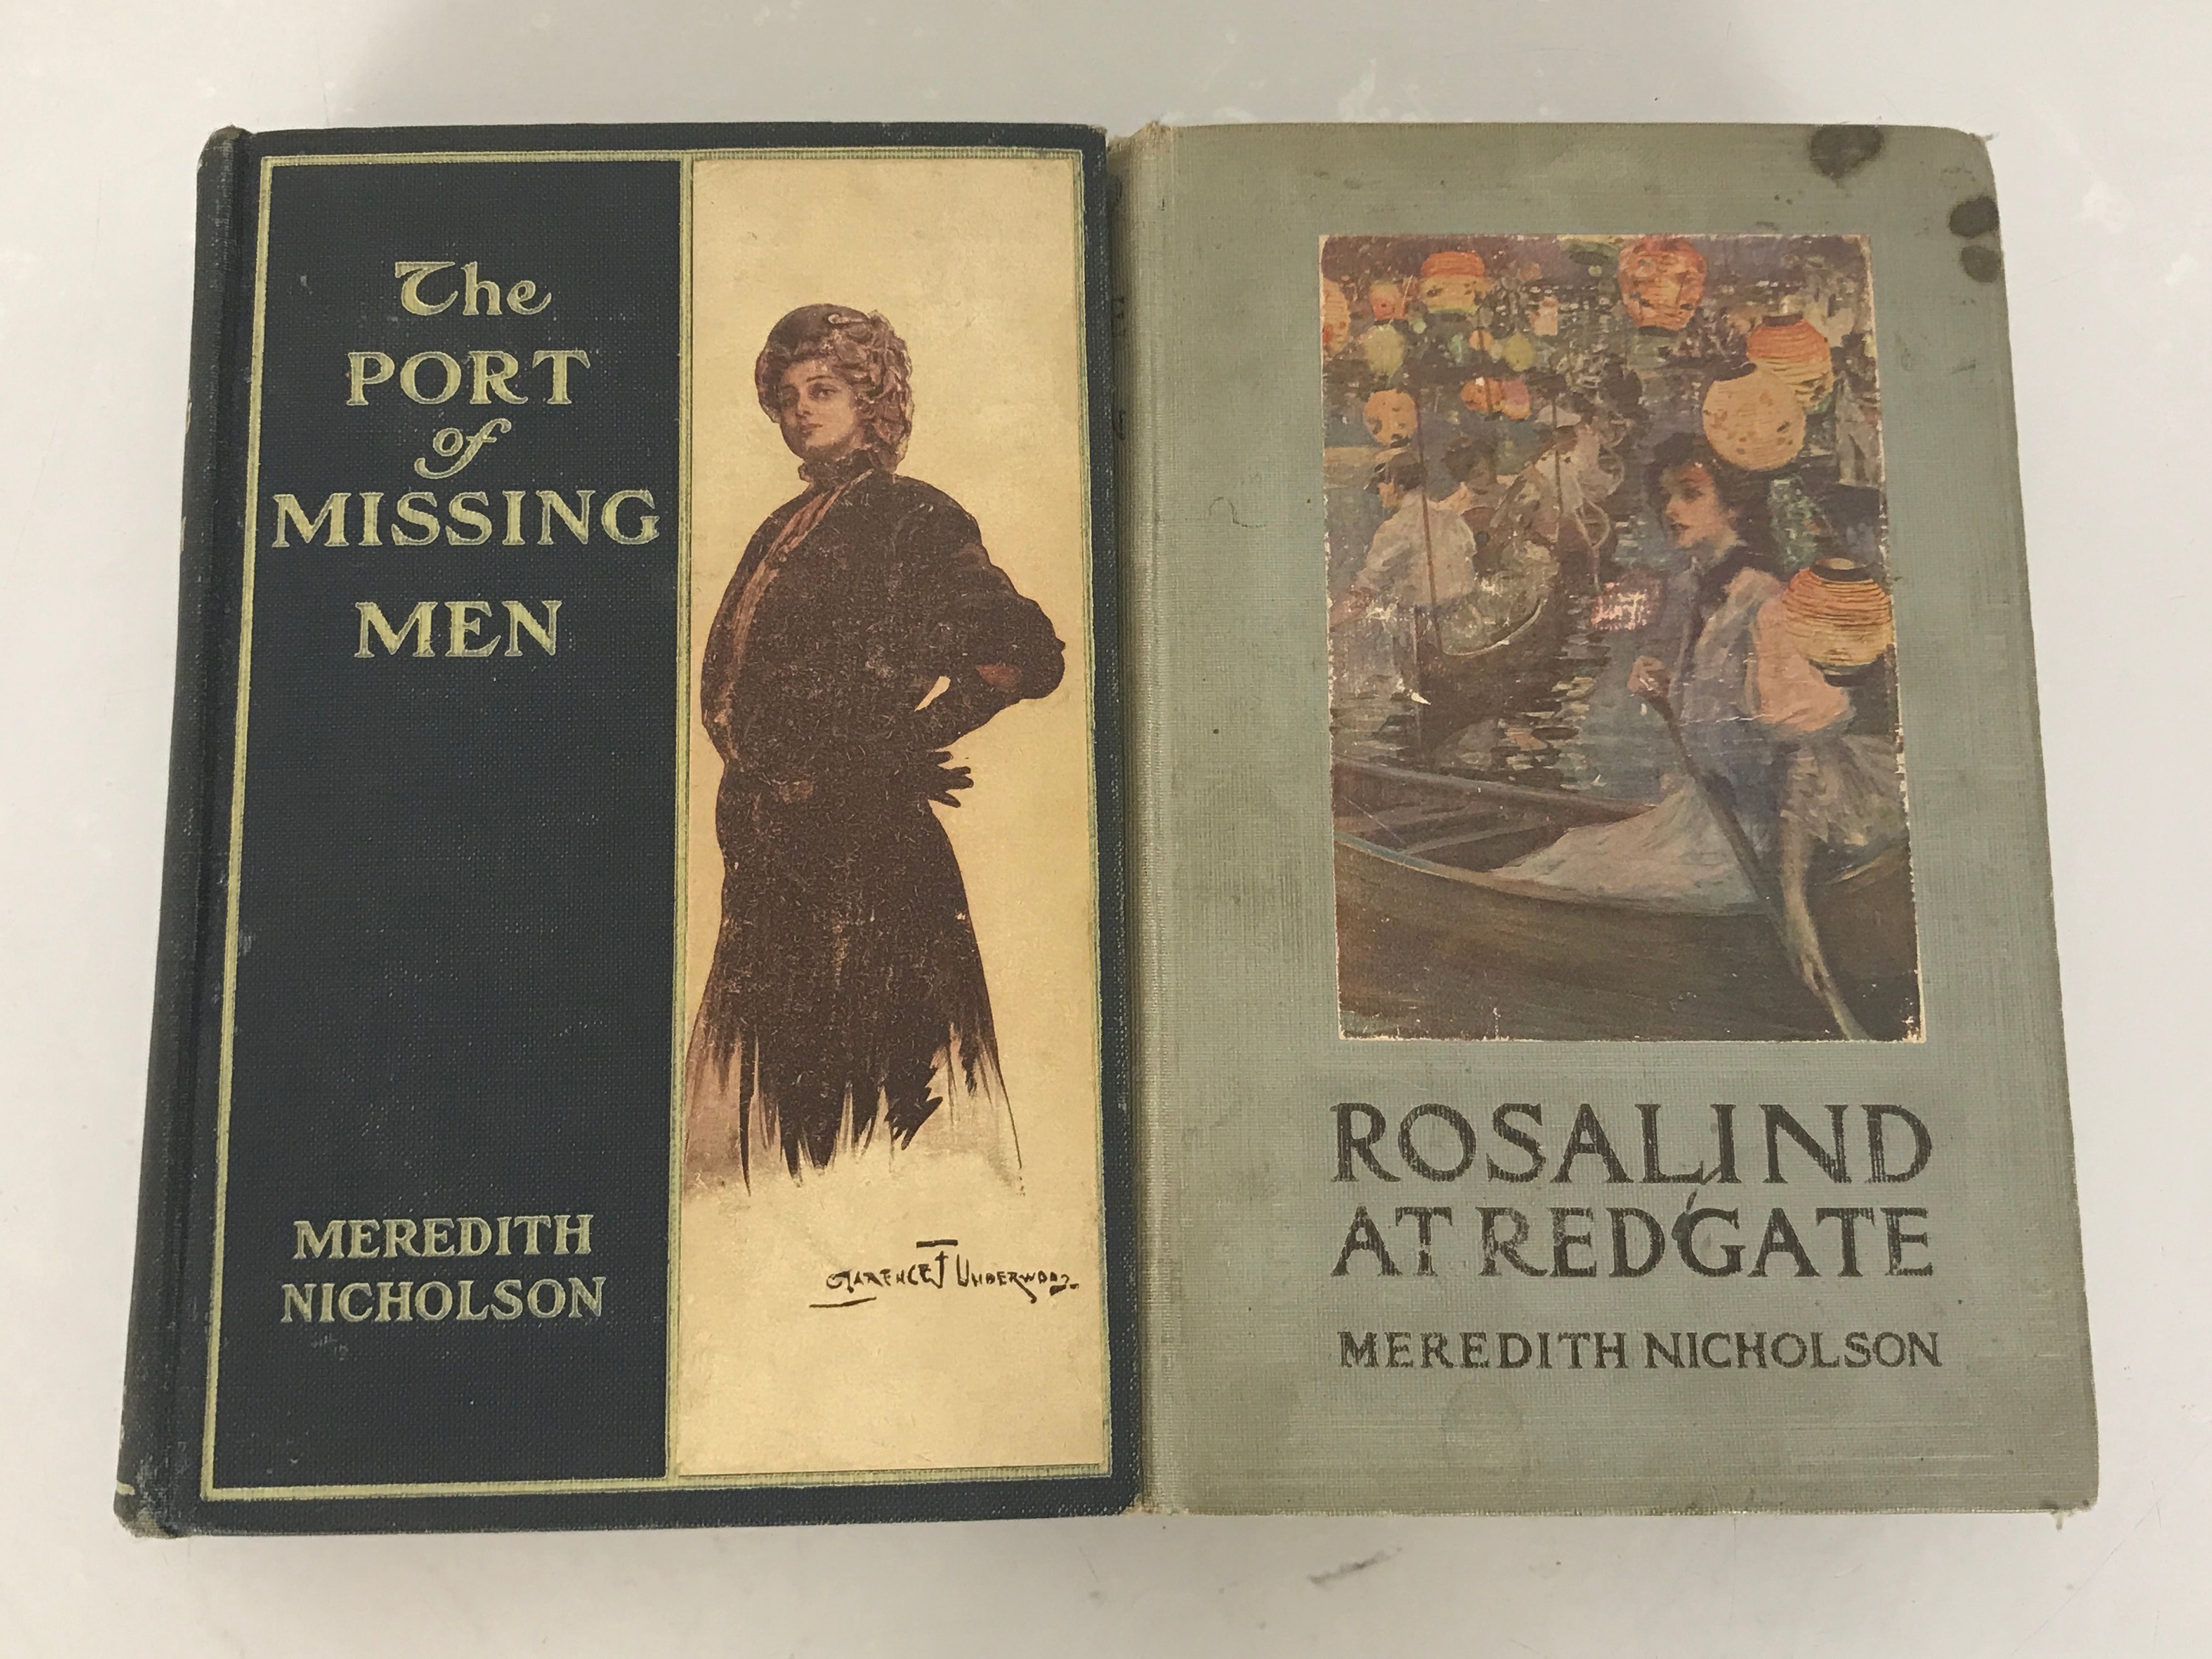 Lot of 2: The Port of Missing Men/Rosalind at Redgate Meredith Nicholson 1907 HC